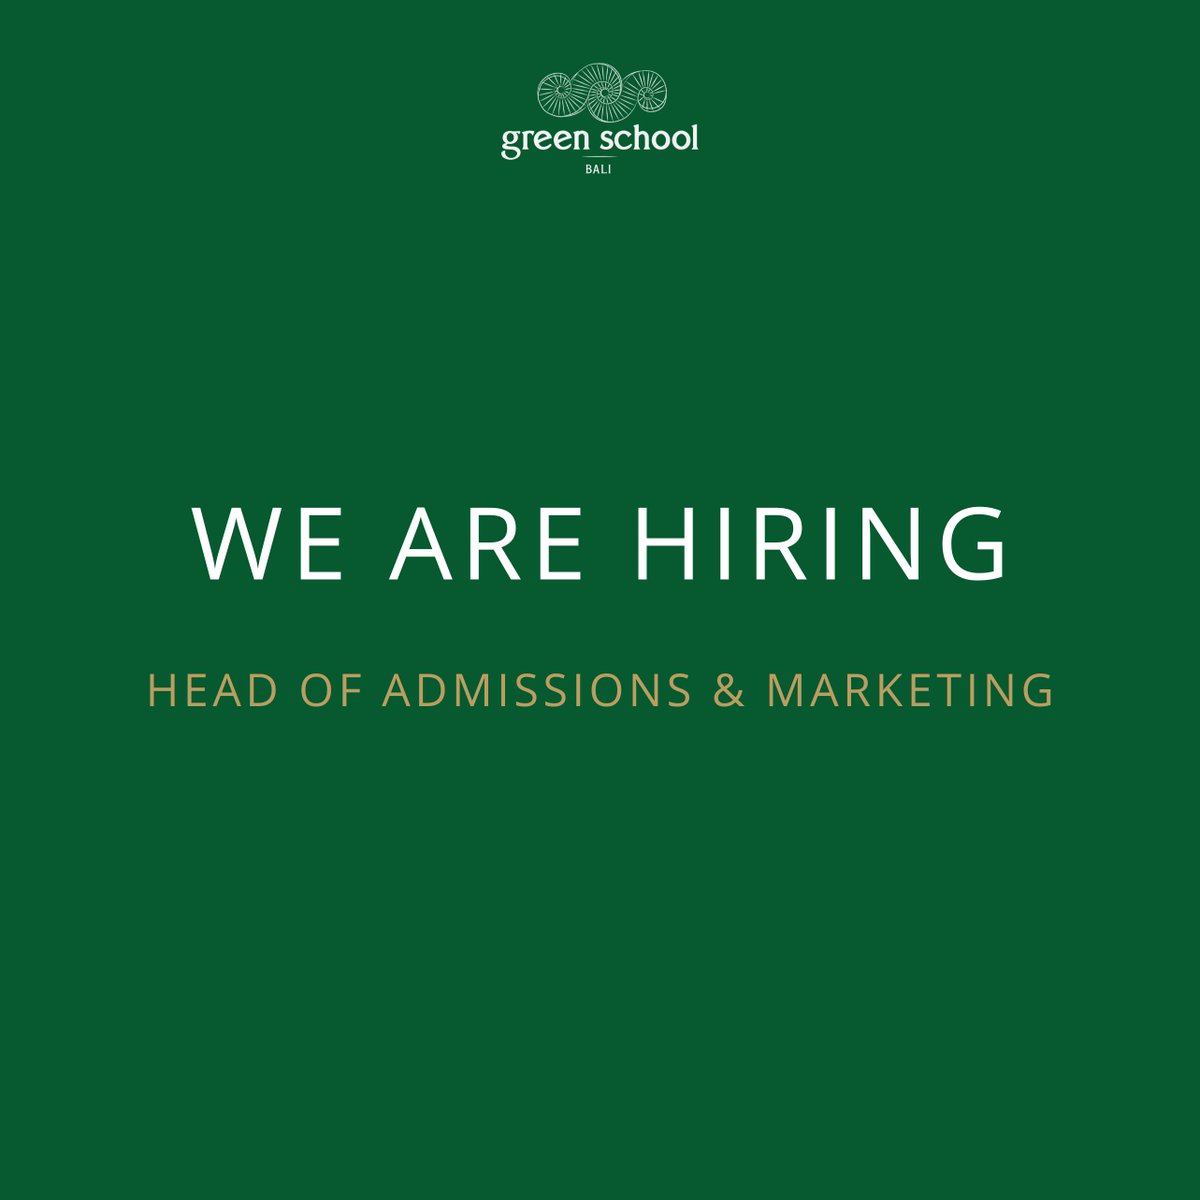 We are #recruiting in Bali for the Head of #Admissions & #Marketing role, responsible for recruiting Green Schoolers & growing our community. We are looking for a team-oriented leader who is collaborative, empathetic & social - Is this you? Apply here: lnkd.in/d7a-rJK